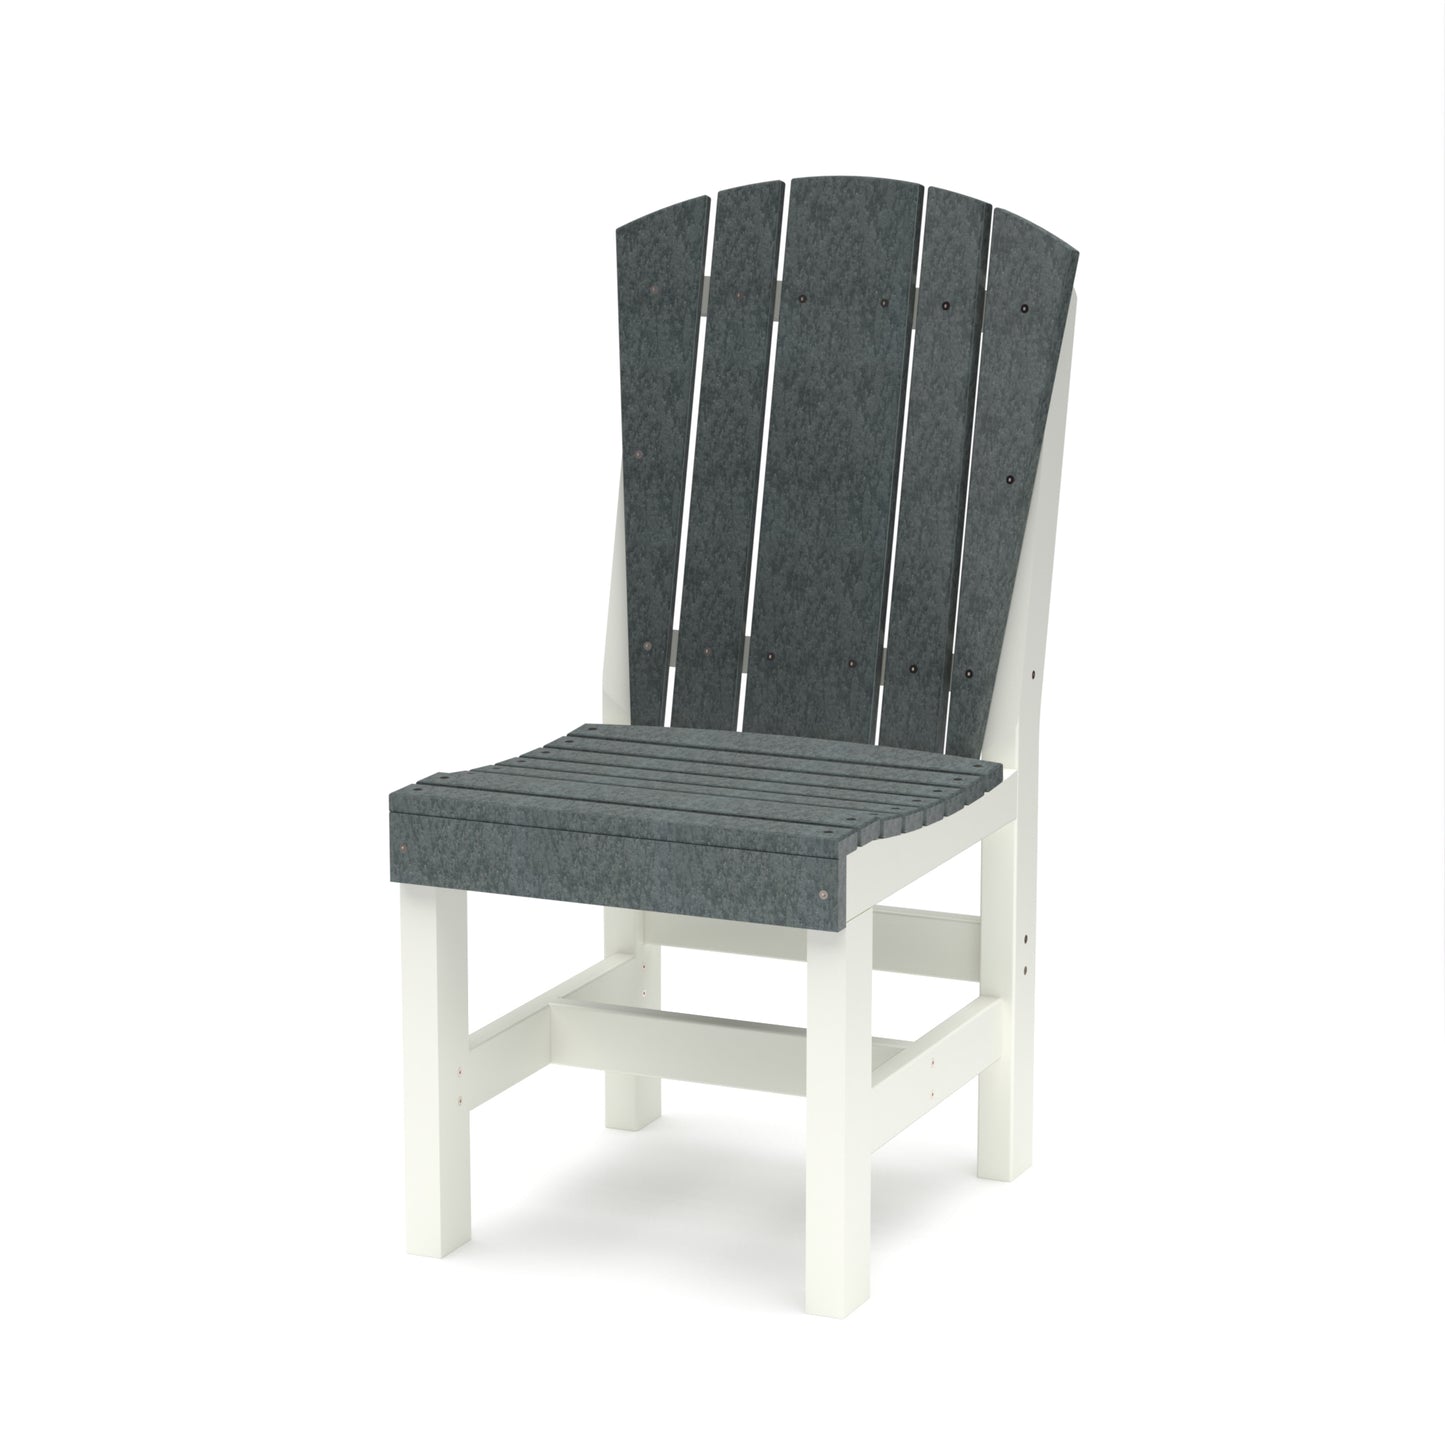 Wildridge Recycled Plastic Heritage Outdoor Dining Chair - LEAD TIME TO SHIP 4 WEEKS